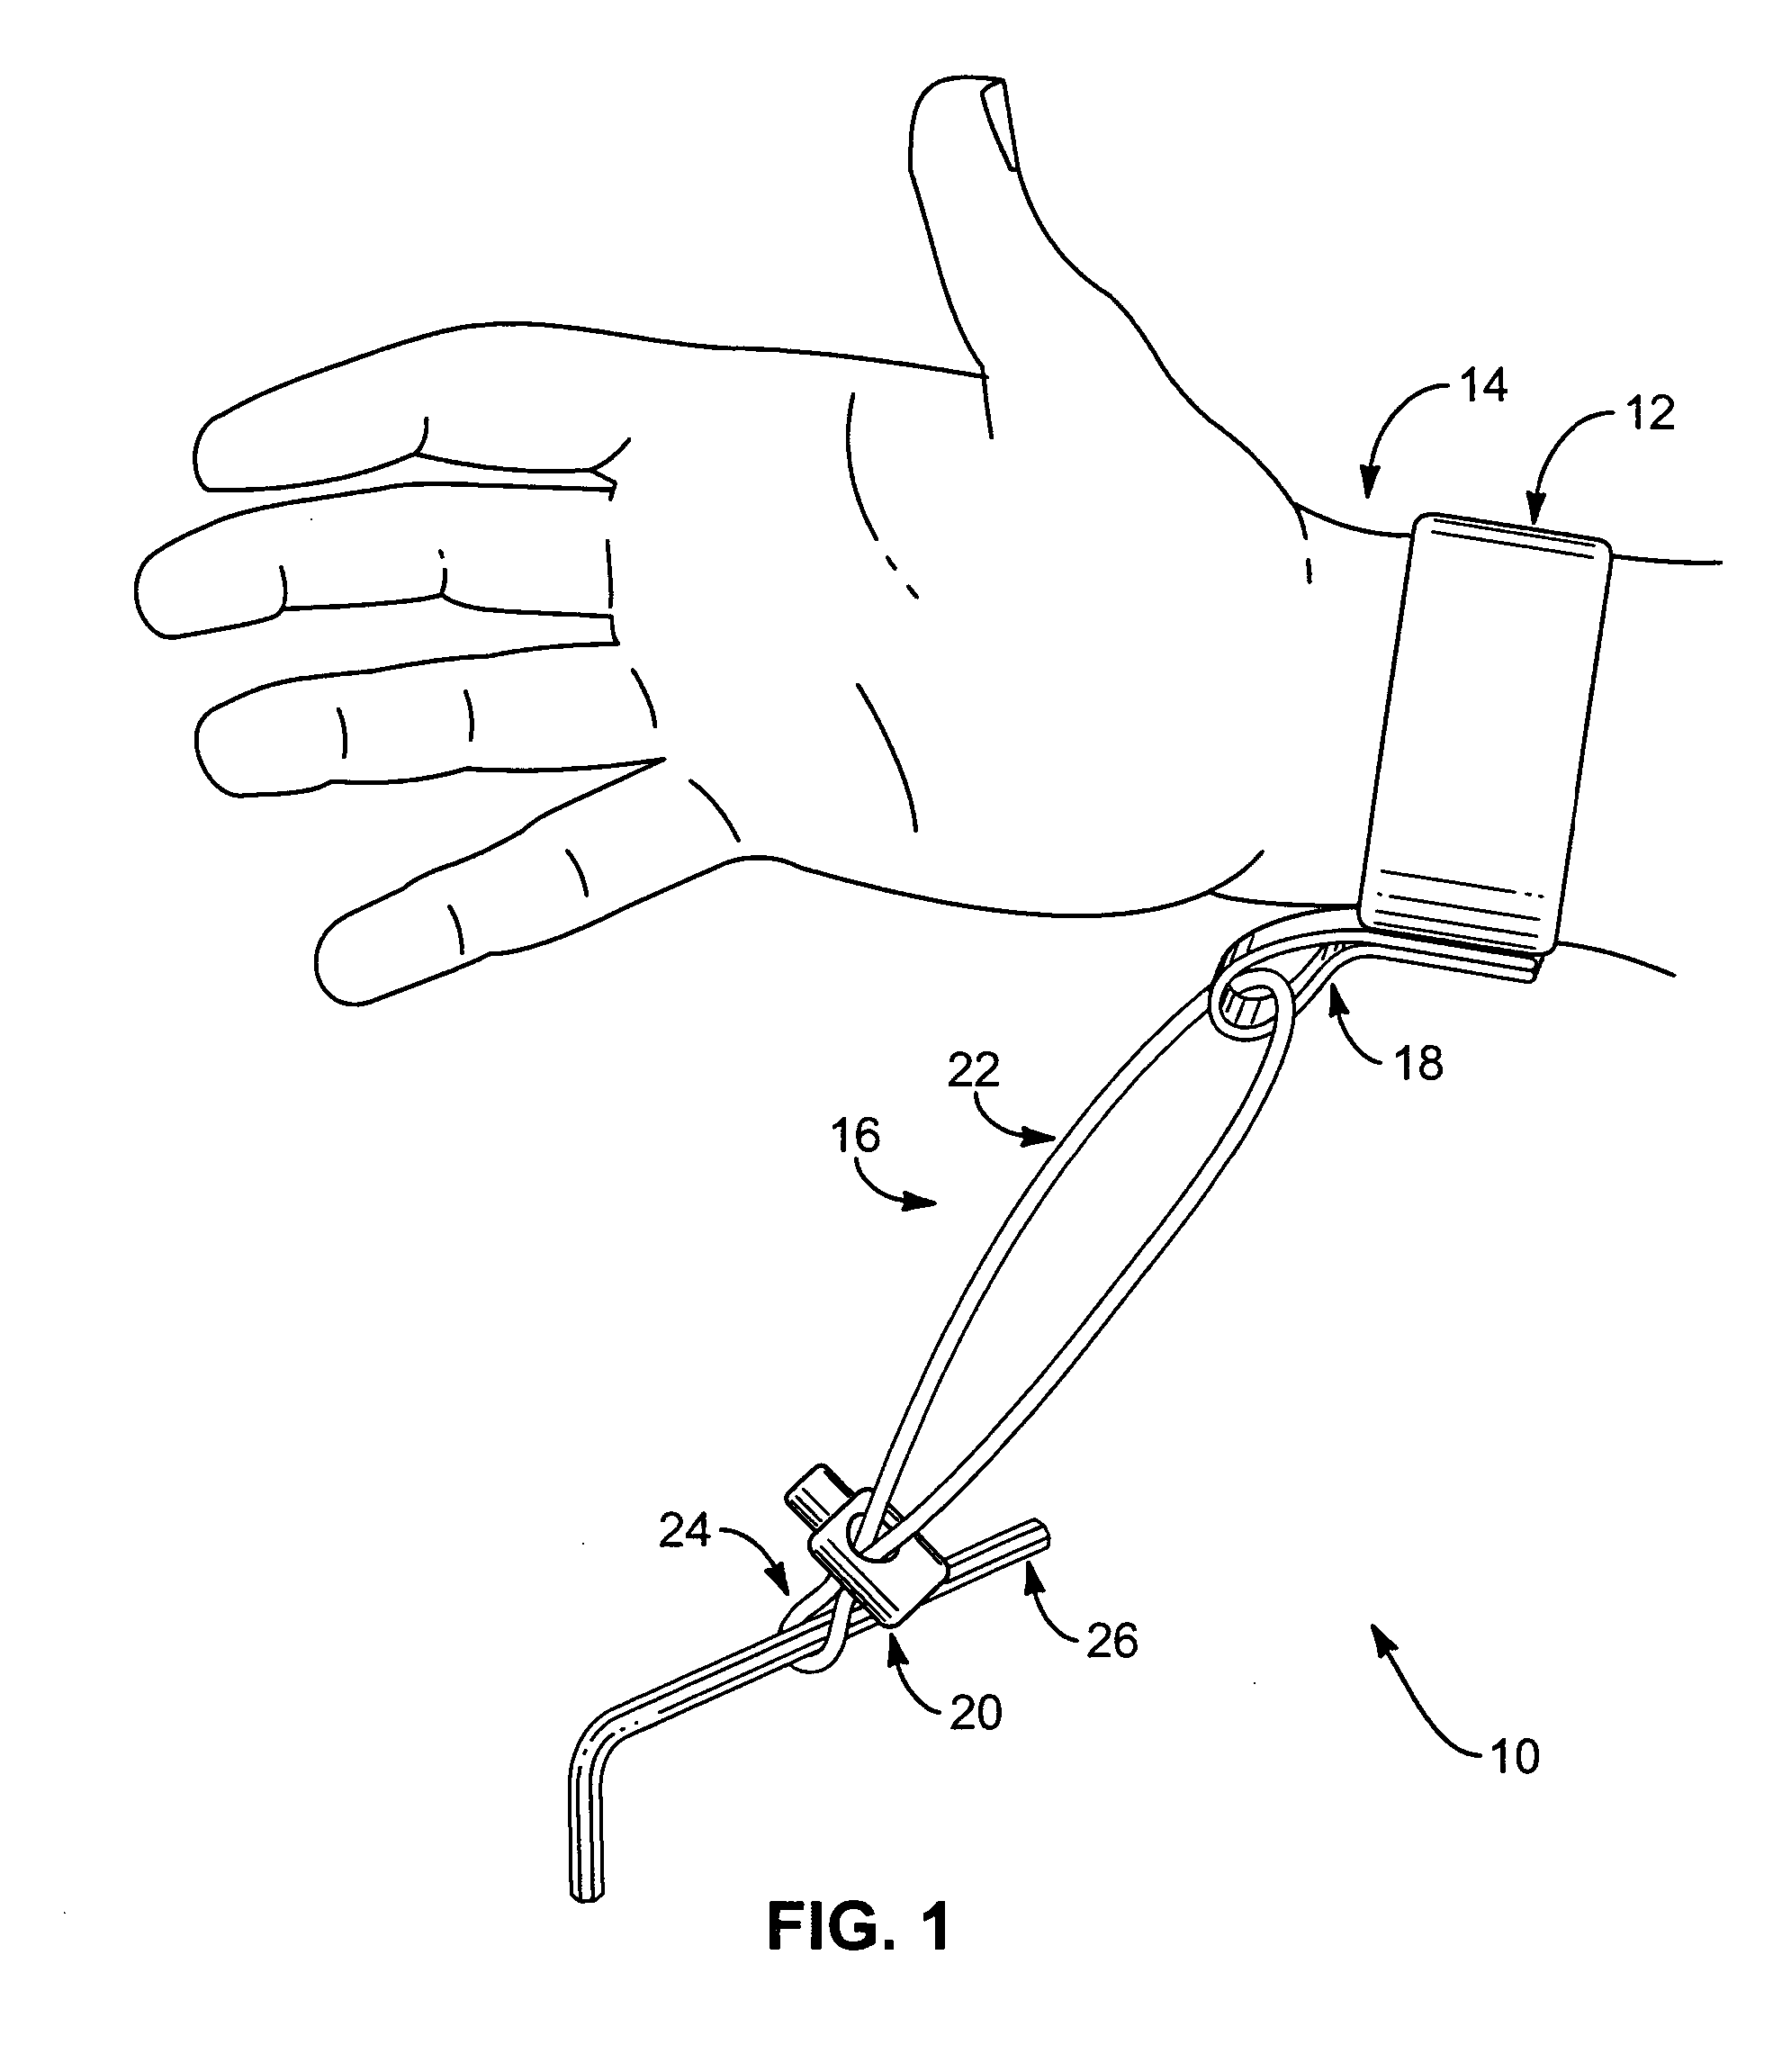 Continuously variable, closed loop, instrument tether